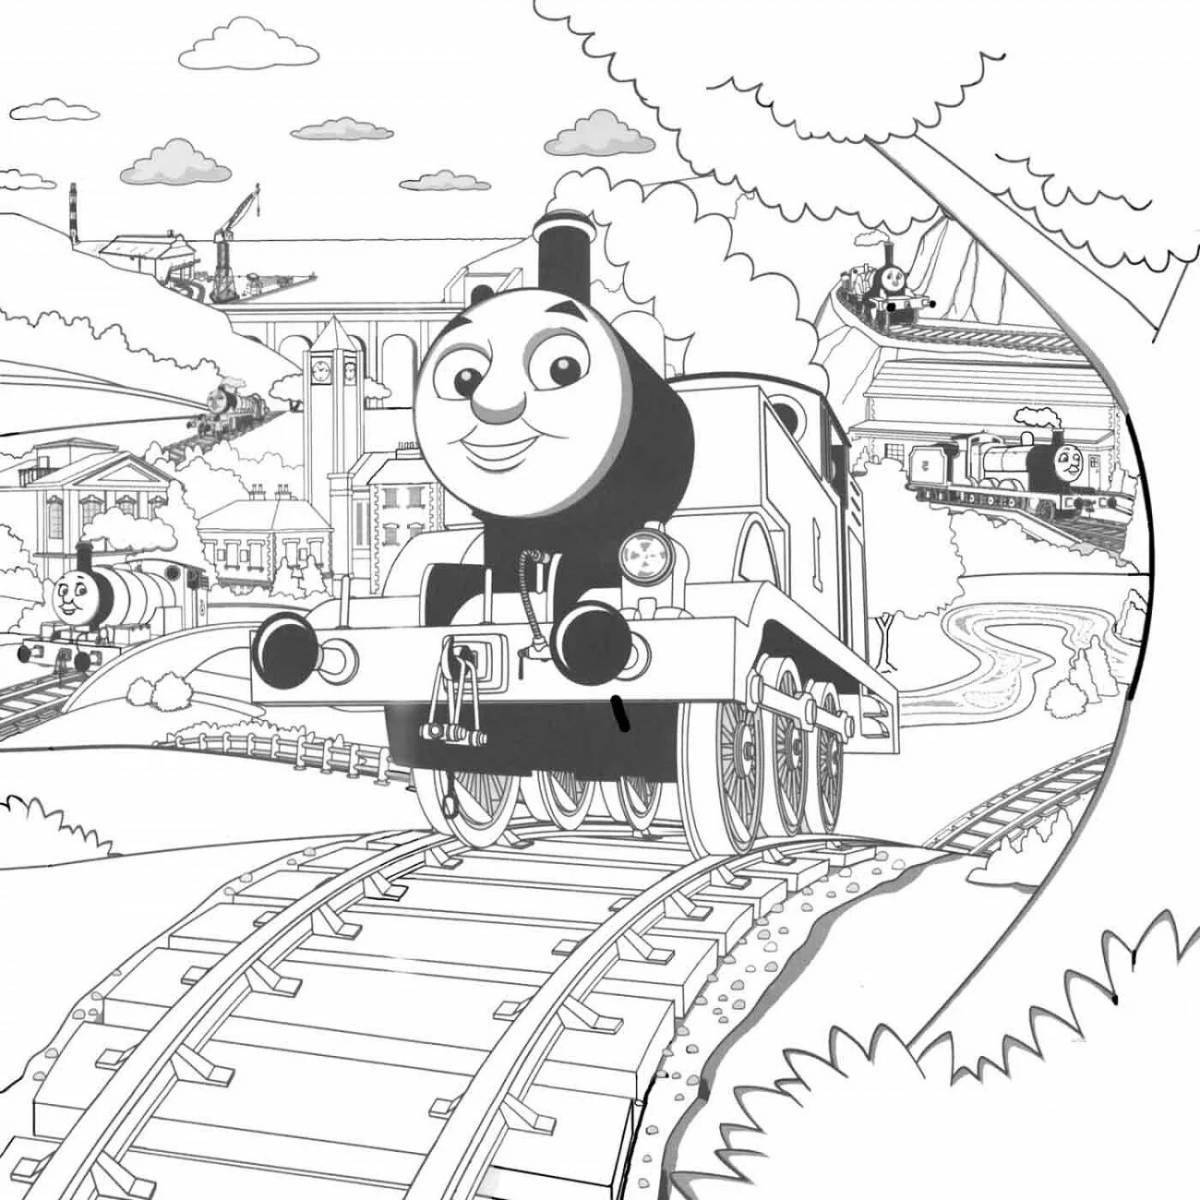 Thomas the Magnificent Tank Engine: Scary Coloring Page